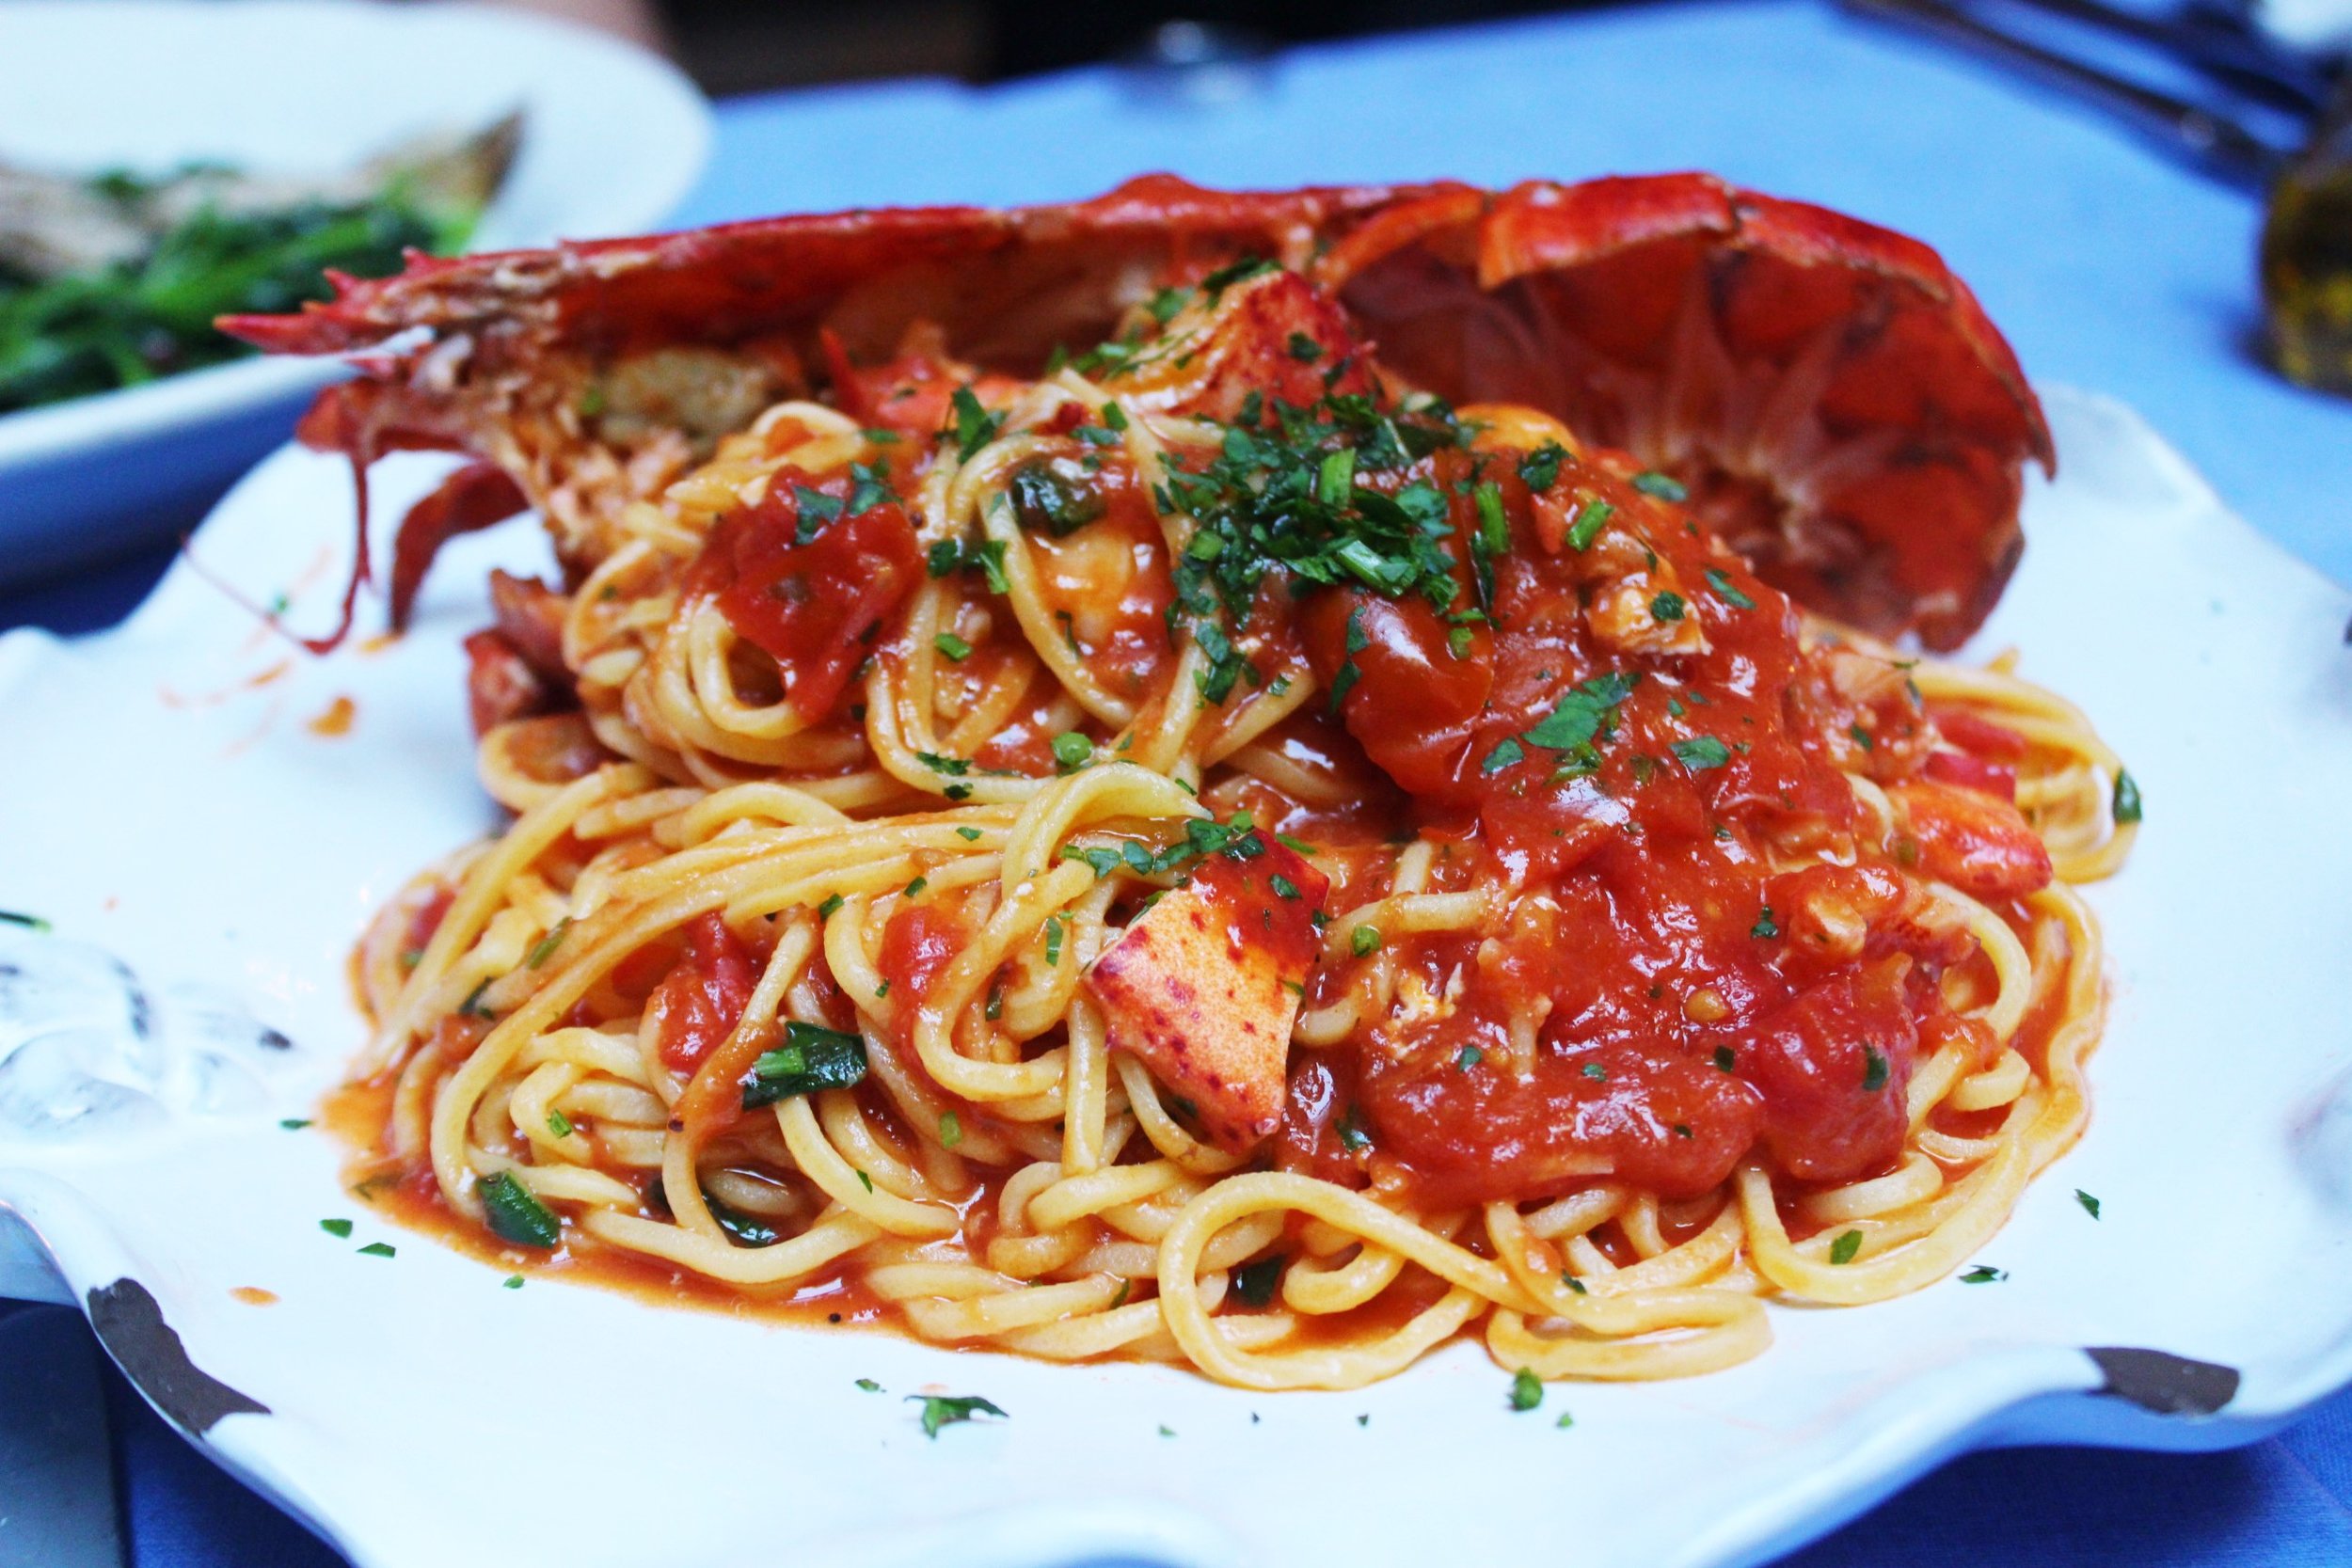 Spaghetti All’astice Half Maine Lobster With Homemade Spaghetti In A Sauce Of Lobster, Cherry Tomato And Brandy